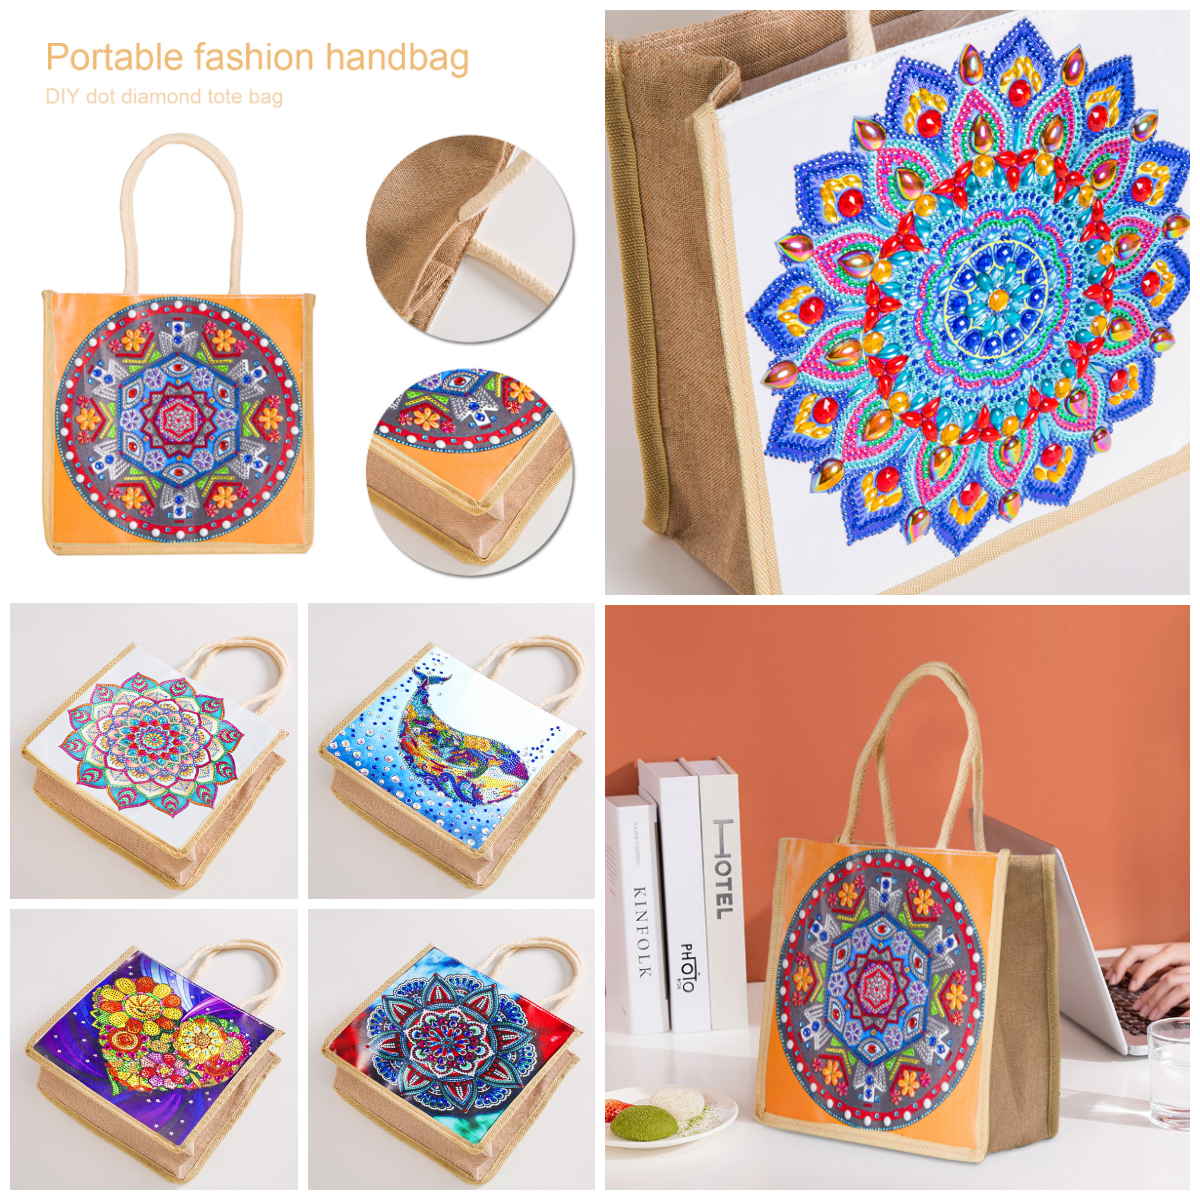 TAIAOJING Girls Cotton Canvas Tote Bag With Diamonds 5D DIY Diamond Painting  Reusable Grocery Bags For Durable Fashionable Bags 